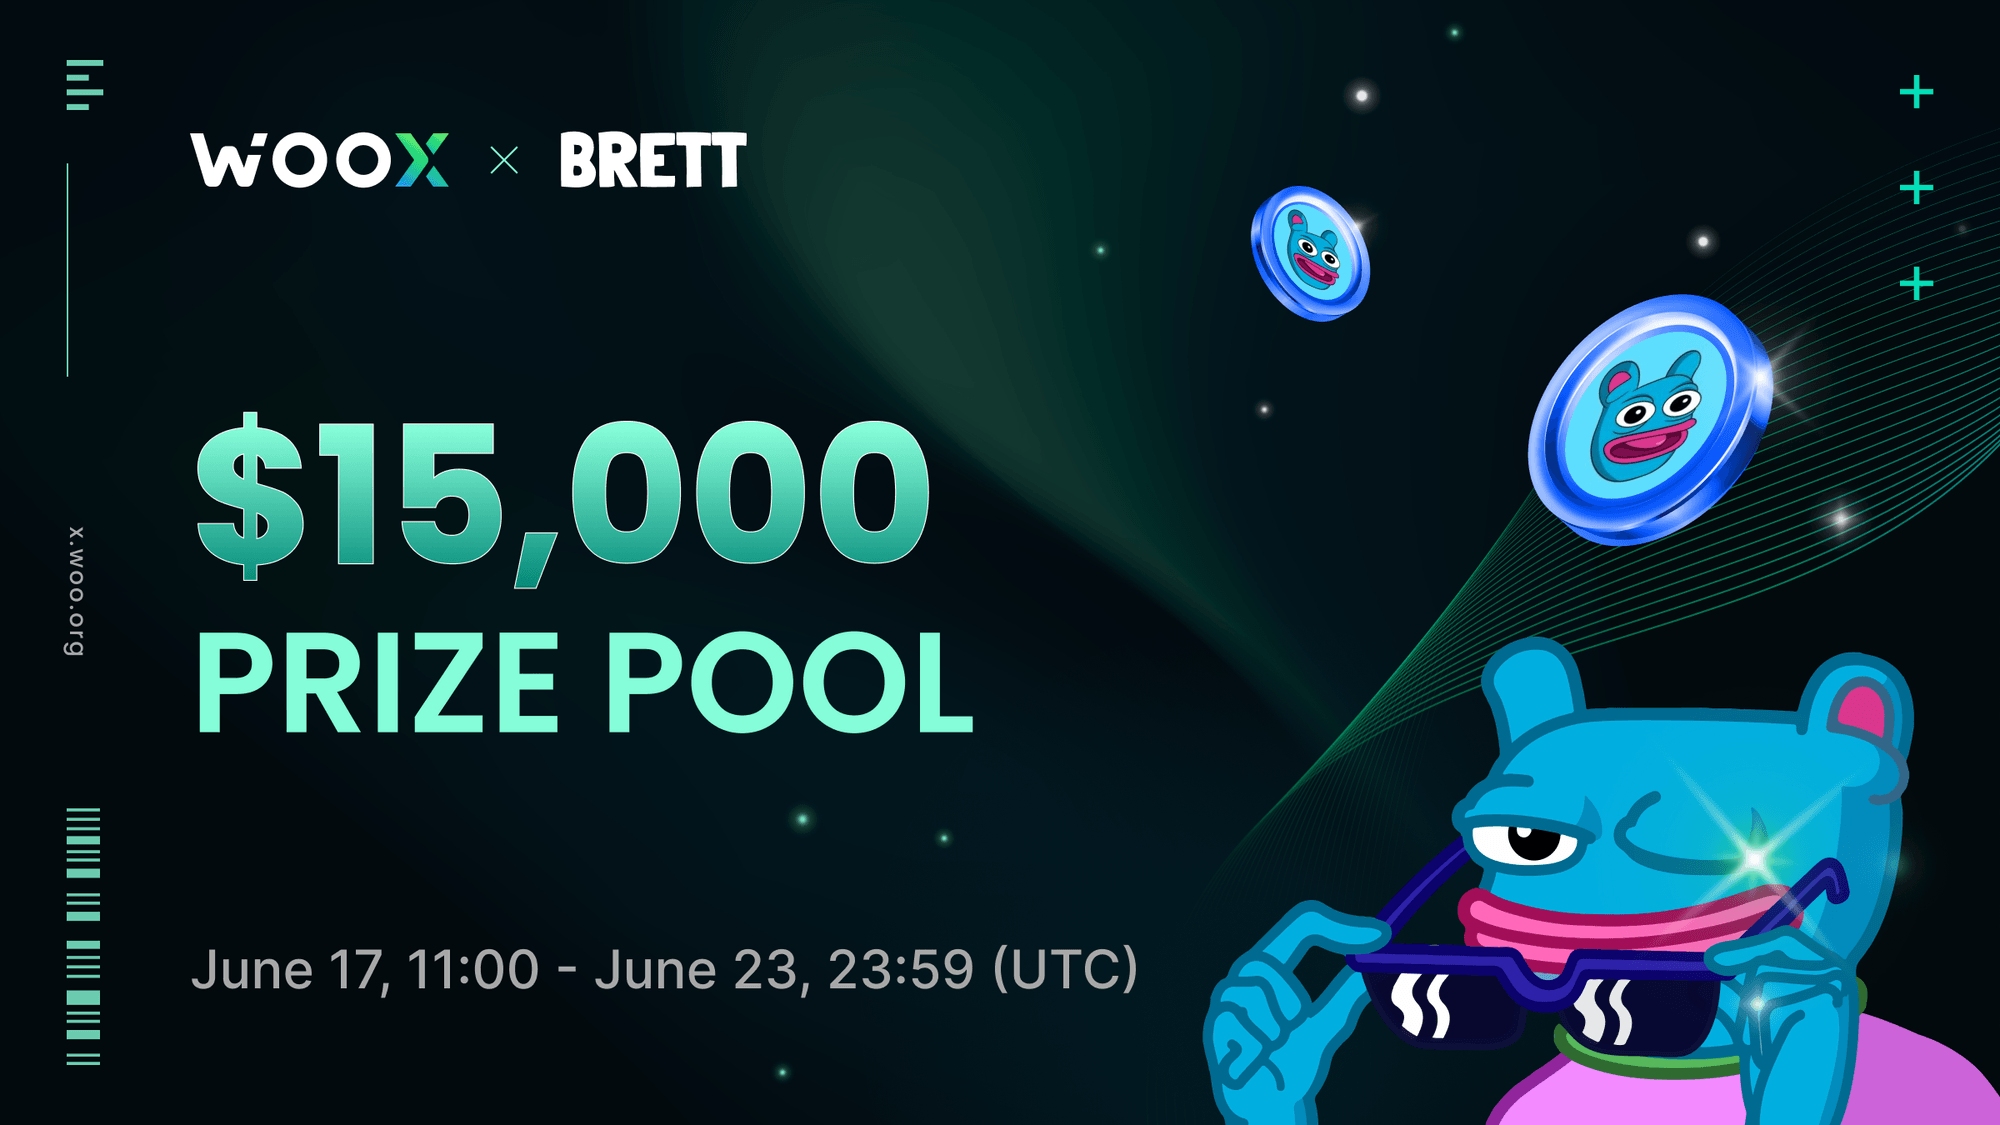 Win from a $15,000 BRETT prize pool and join the excitement!